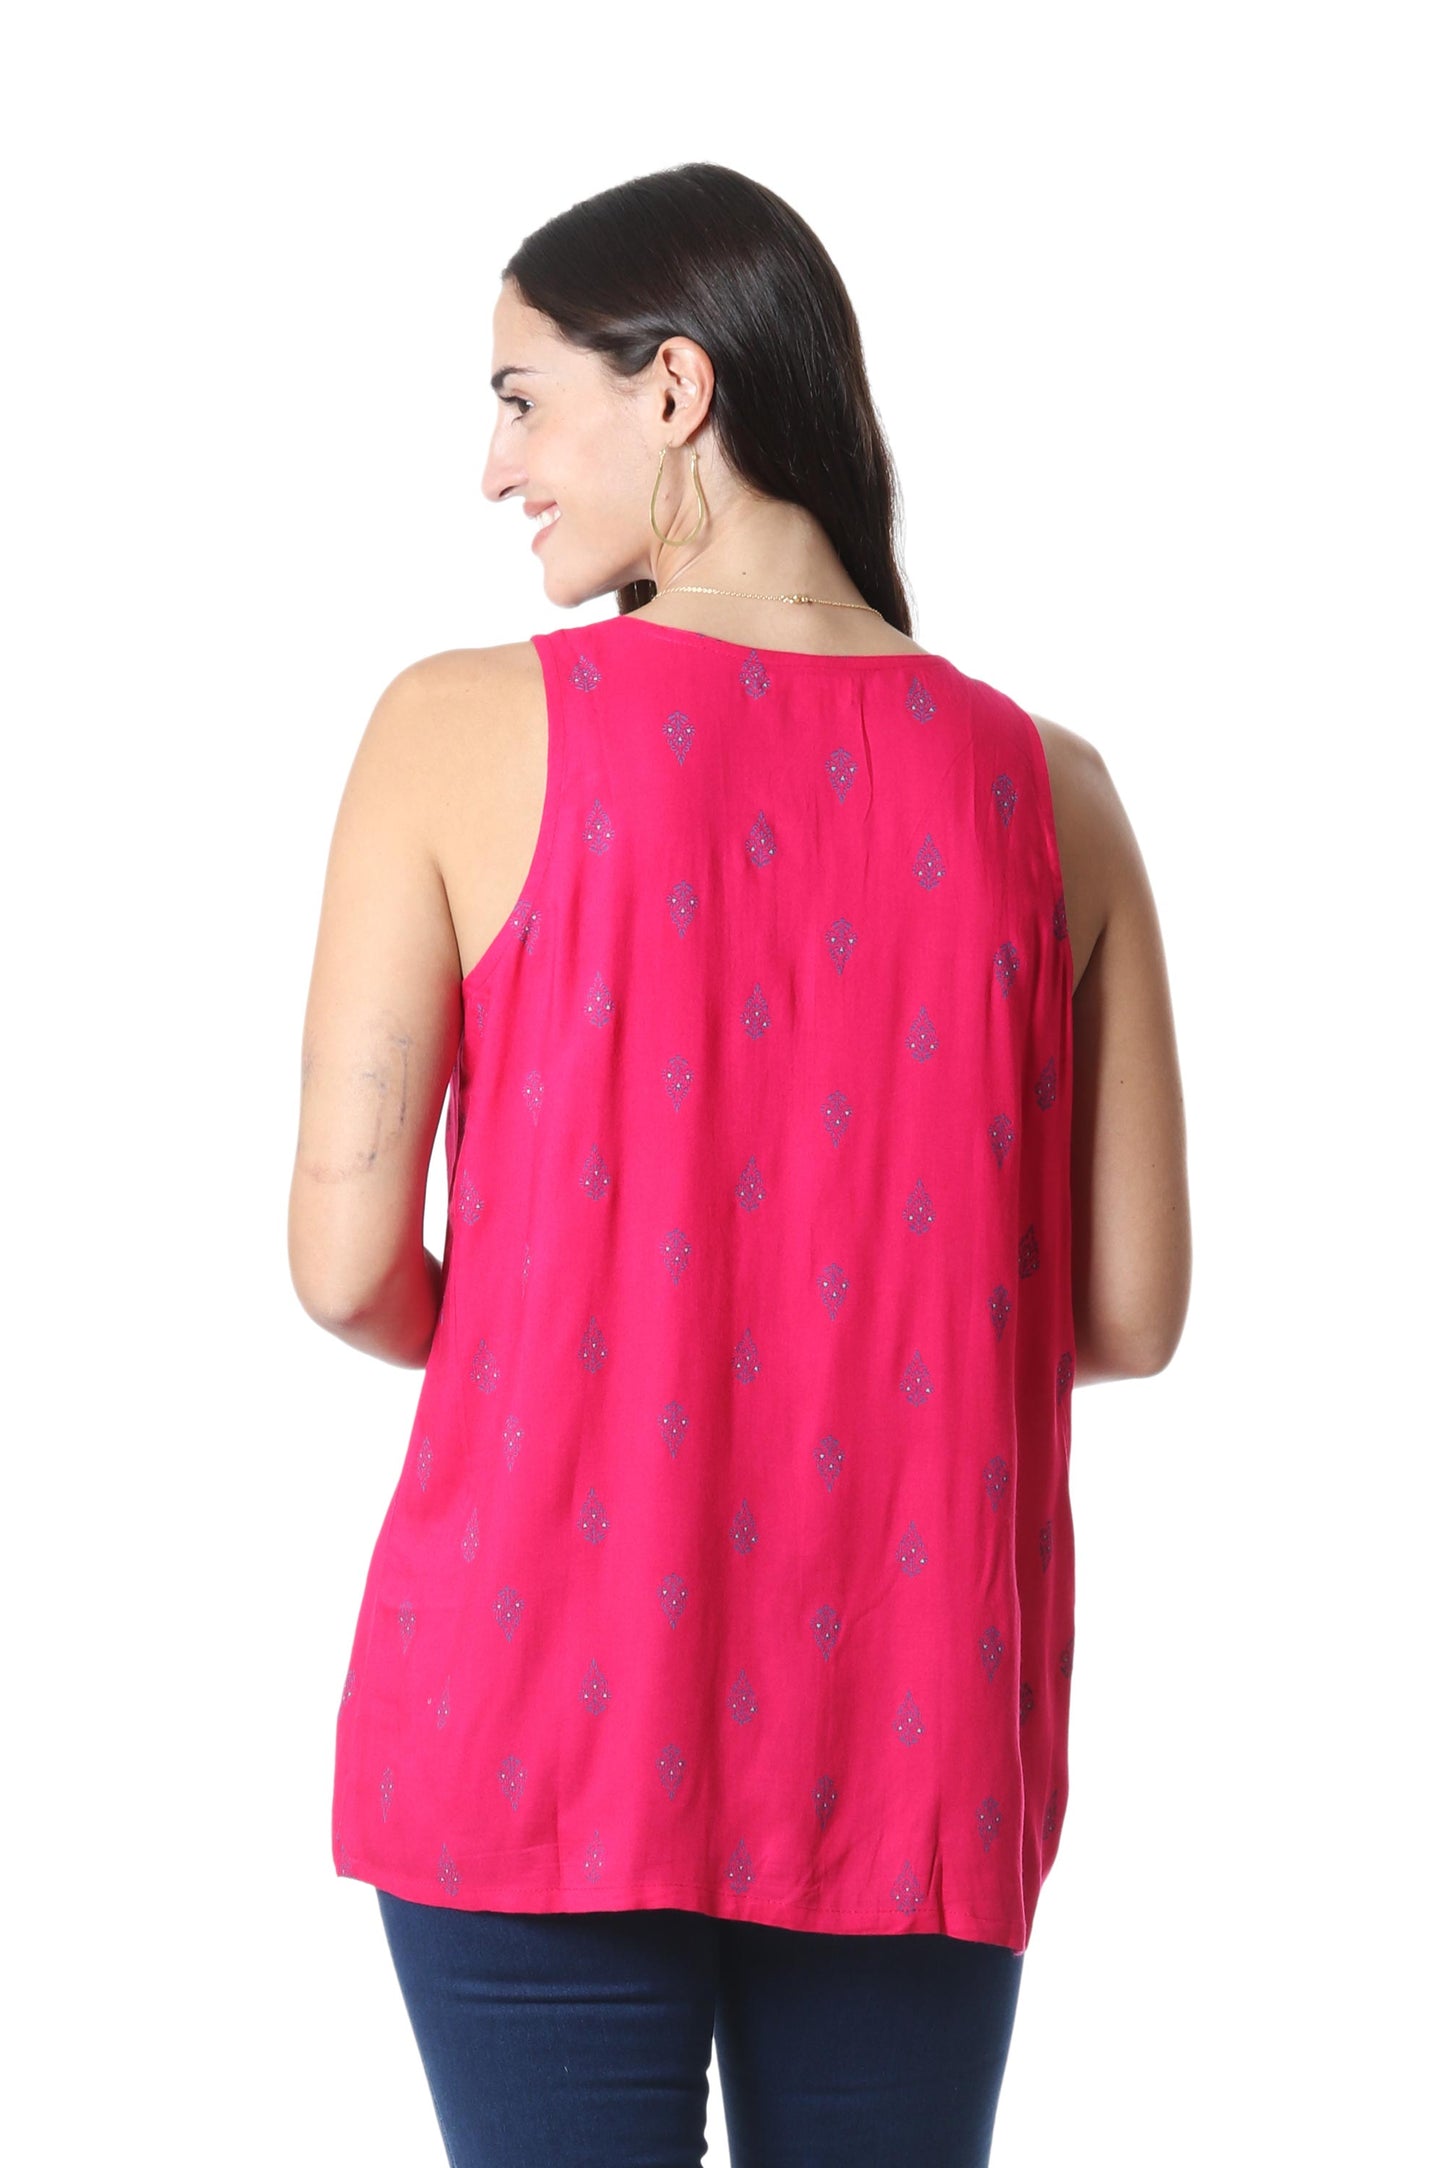 Ruby My Dear Screen Printed Pink Rayon Sleeveless Blouse from India